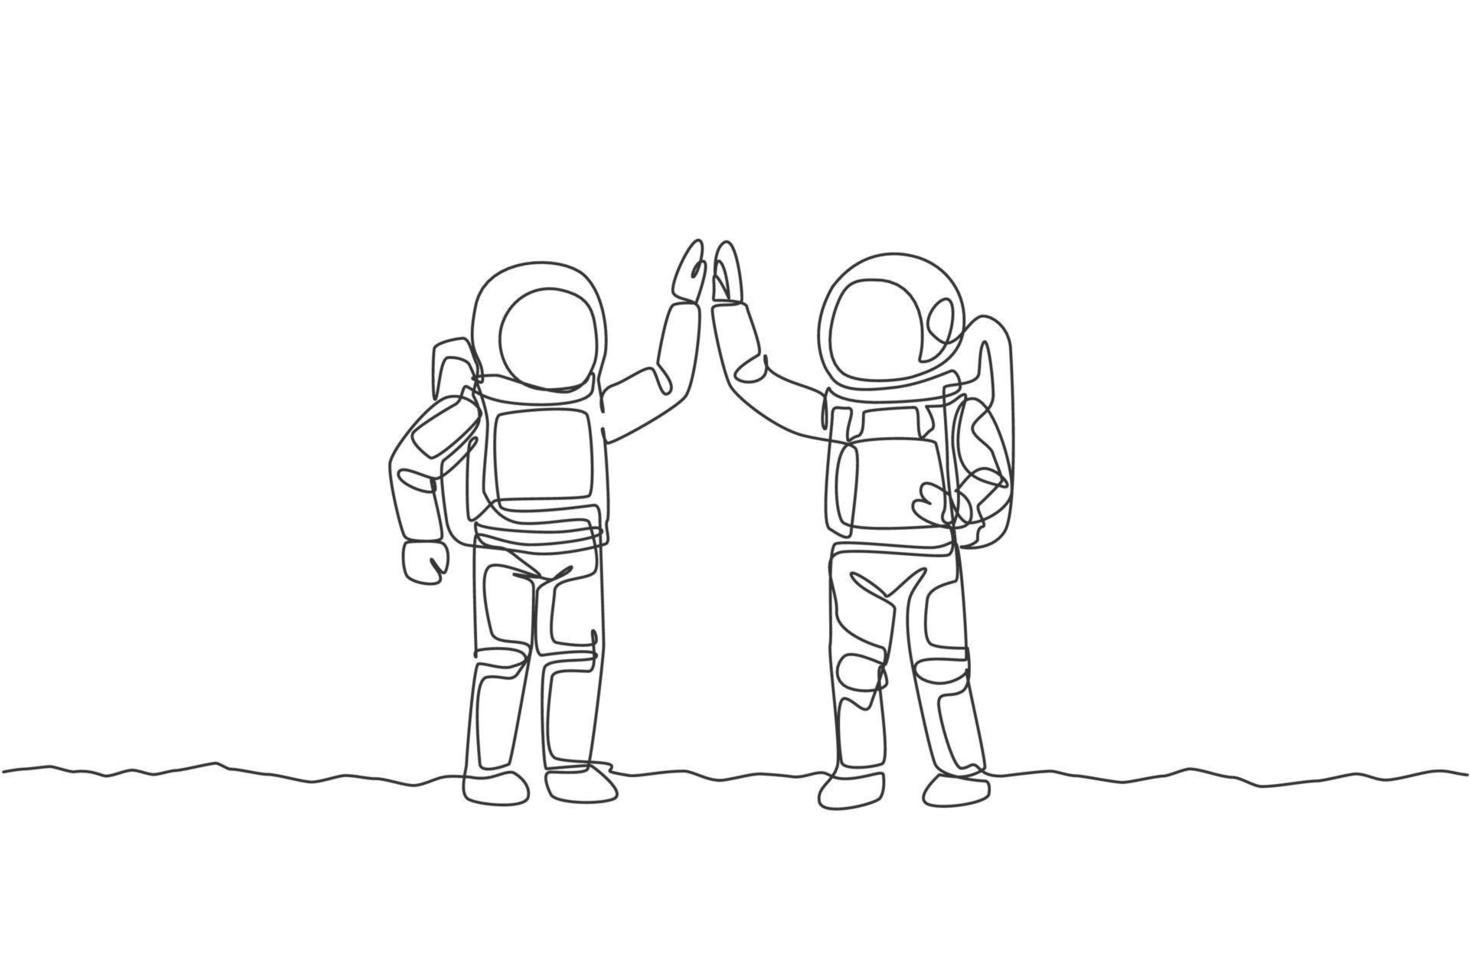 One continuous line drawing of two young happy astronauts giving high five gesture to celebrate teamwork in moon surface. Spaceman concept. Dynamic single line draw design vector graphic illustration